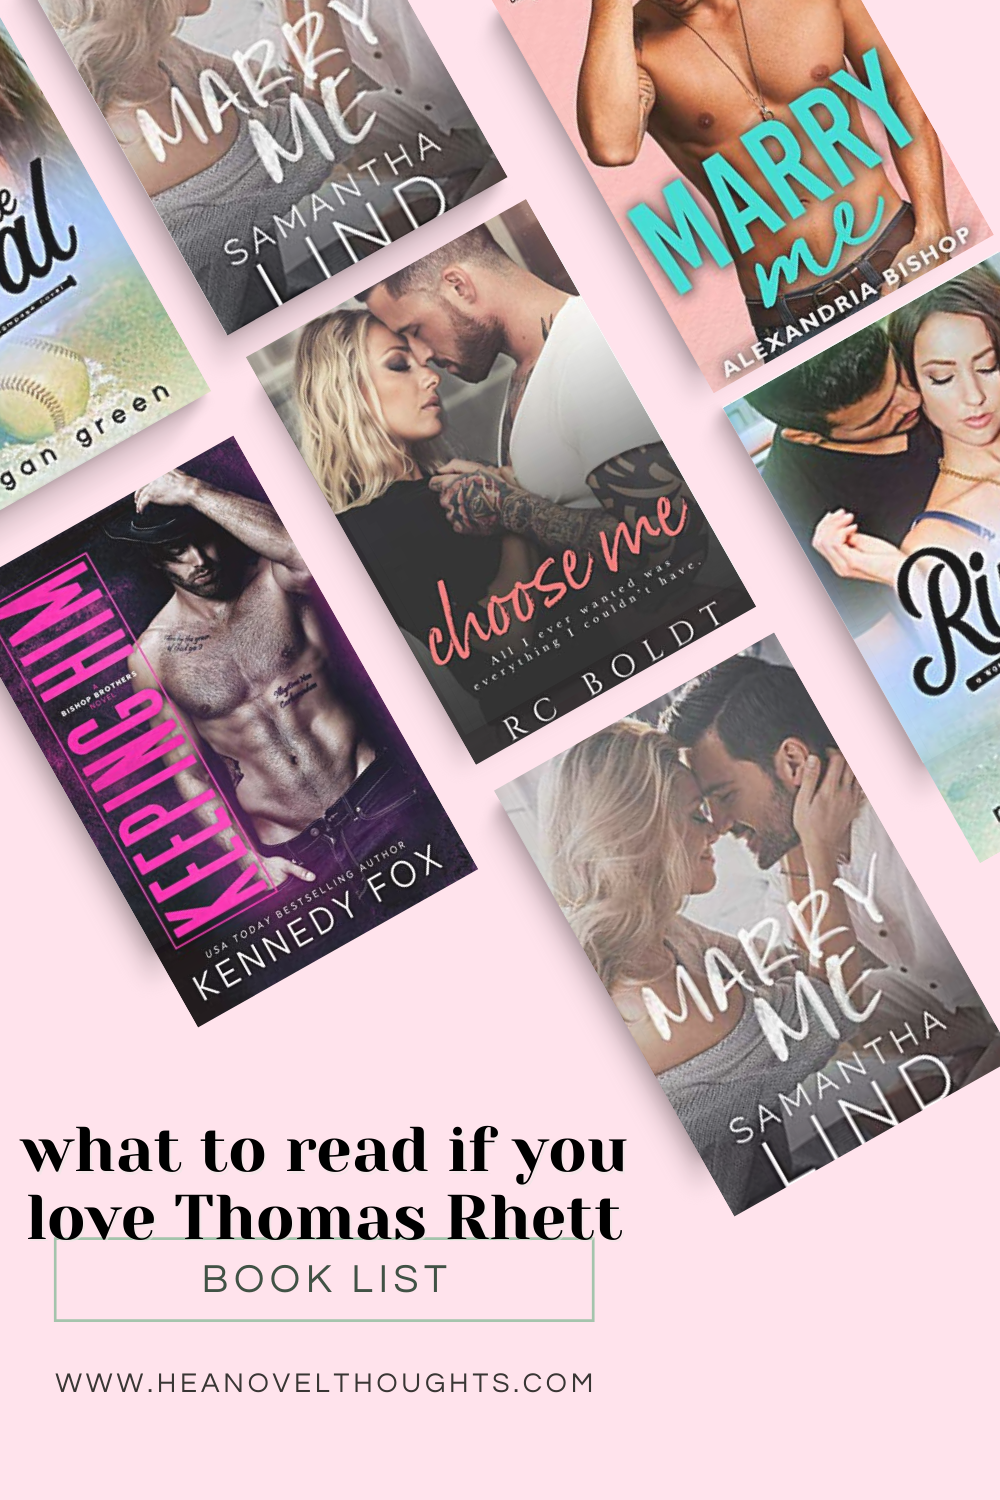 5 Books to Read after Listening to Marry My by Thomas Rhett